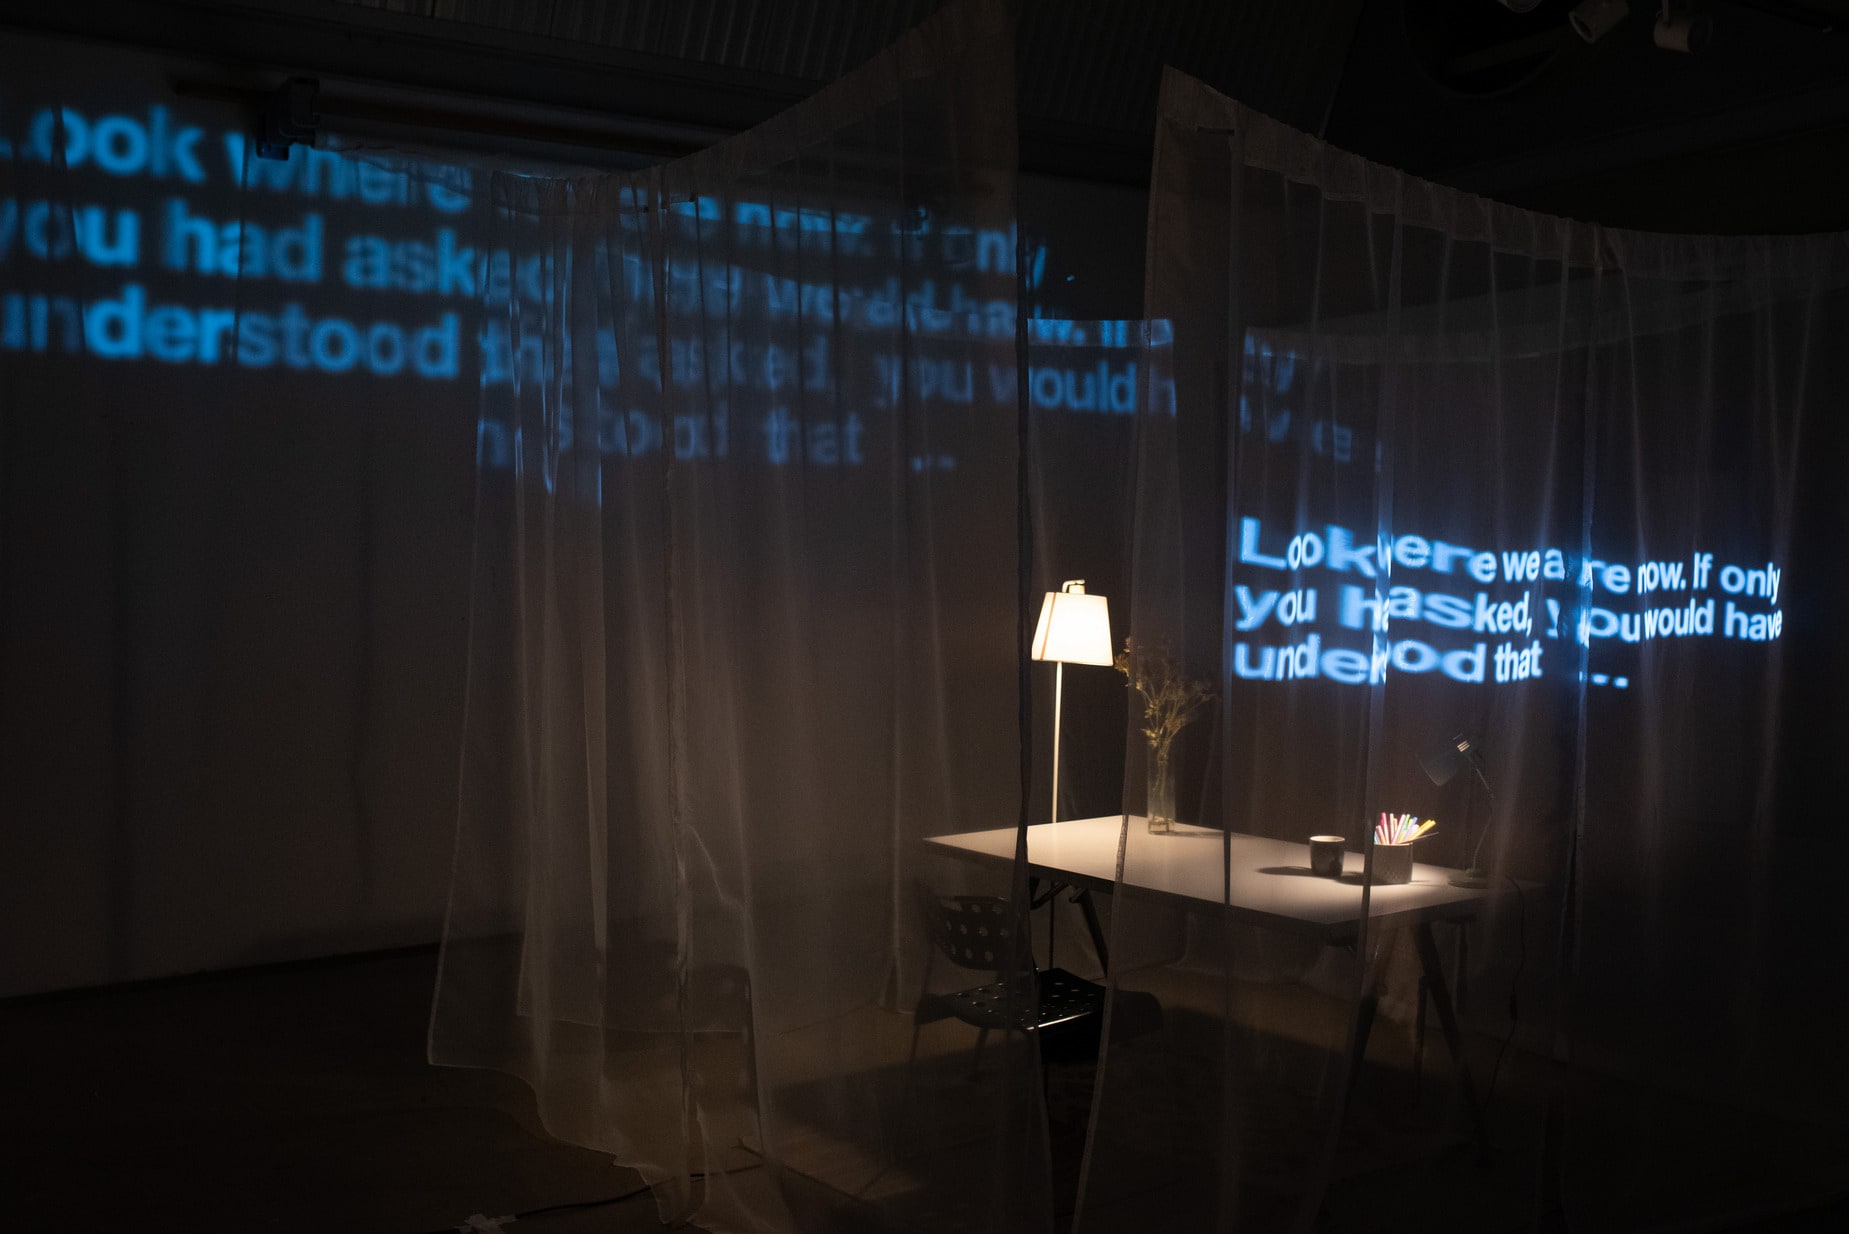 Installation with projections and netted private space inspired by confession boxes. An interactive digital platform awaits.